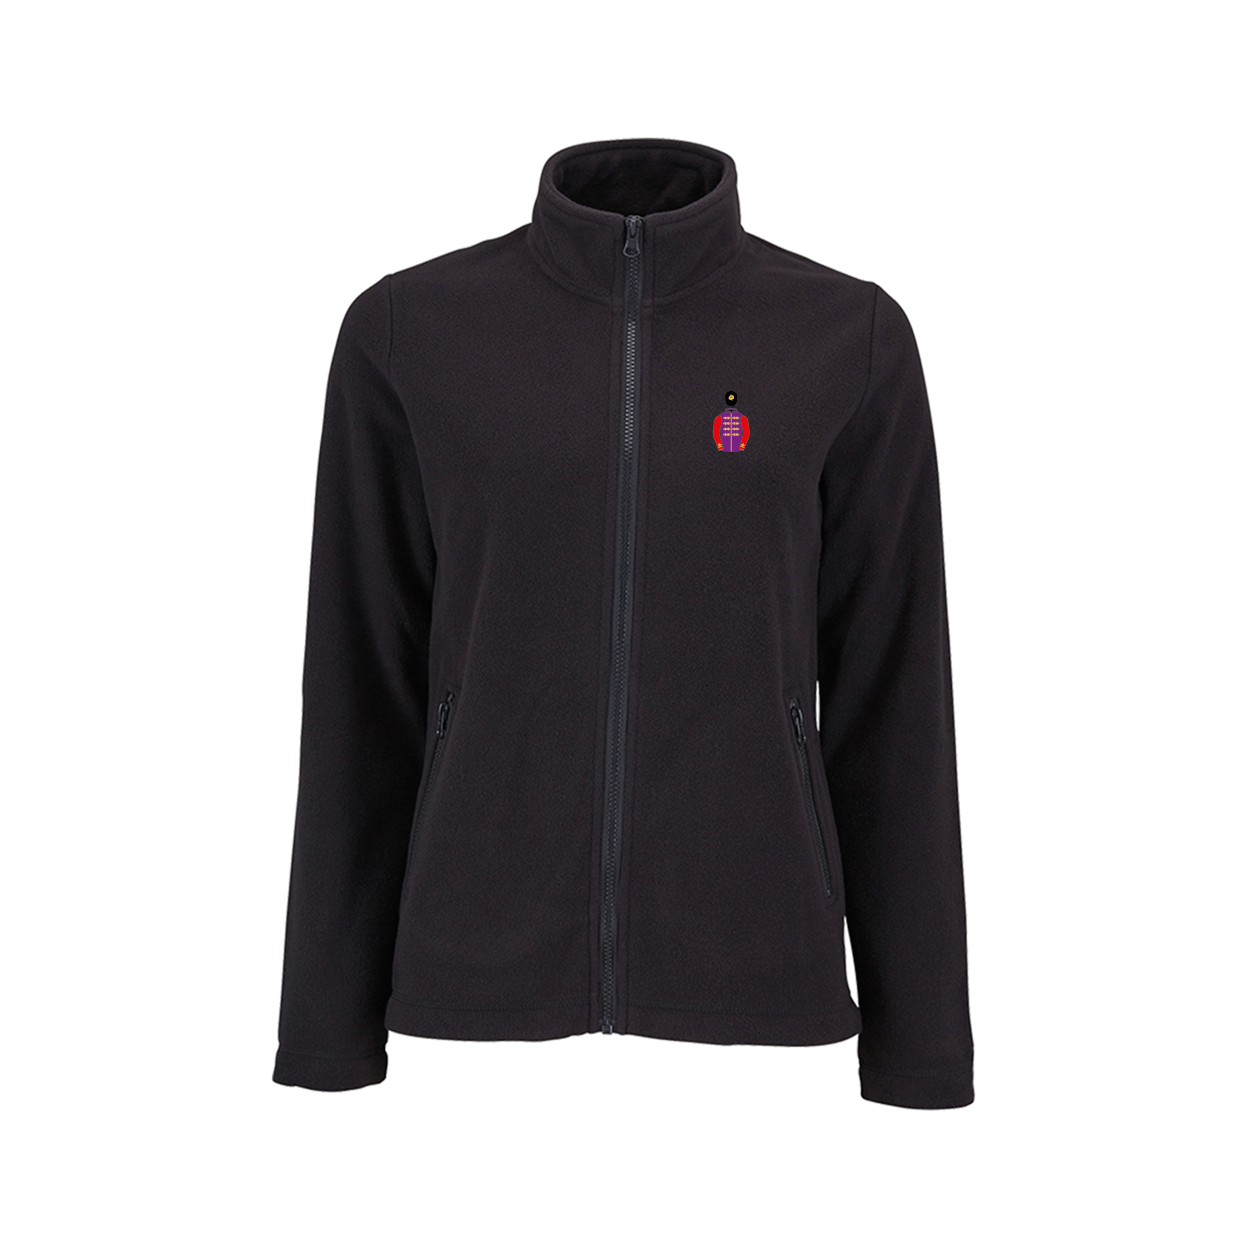 Ladies The Queen Embroidered Fleece Jacket - Clothing - Hacked Up